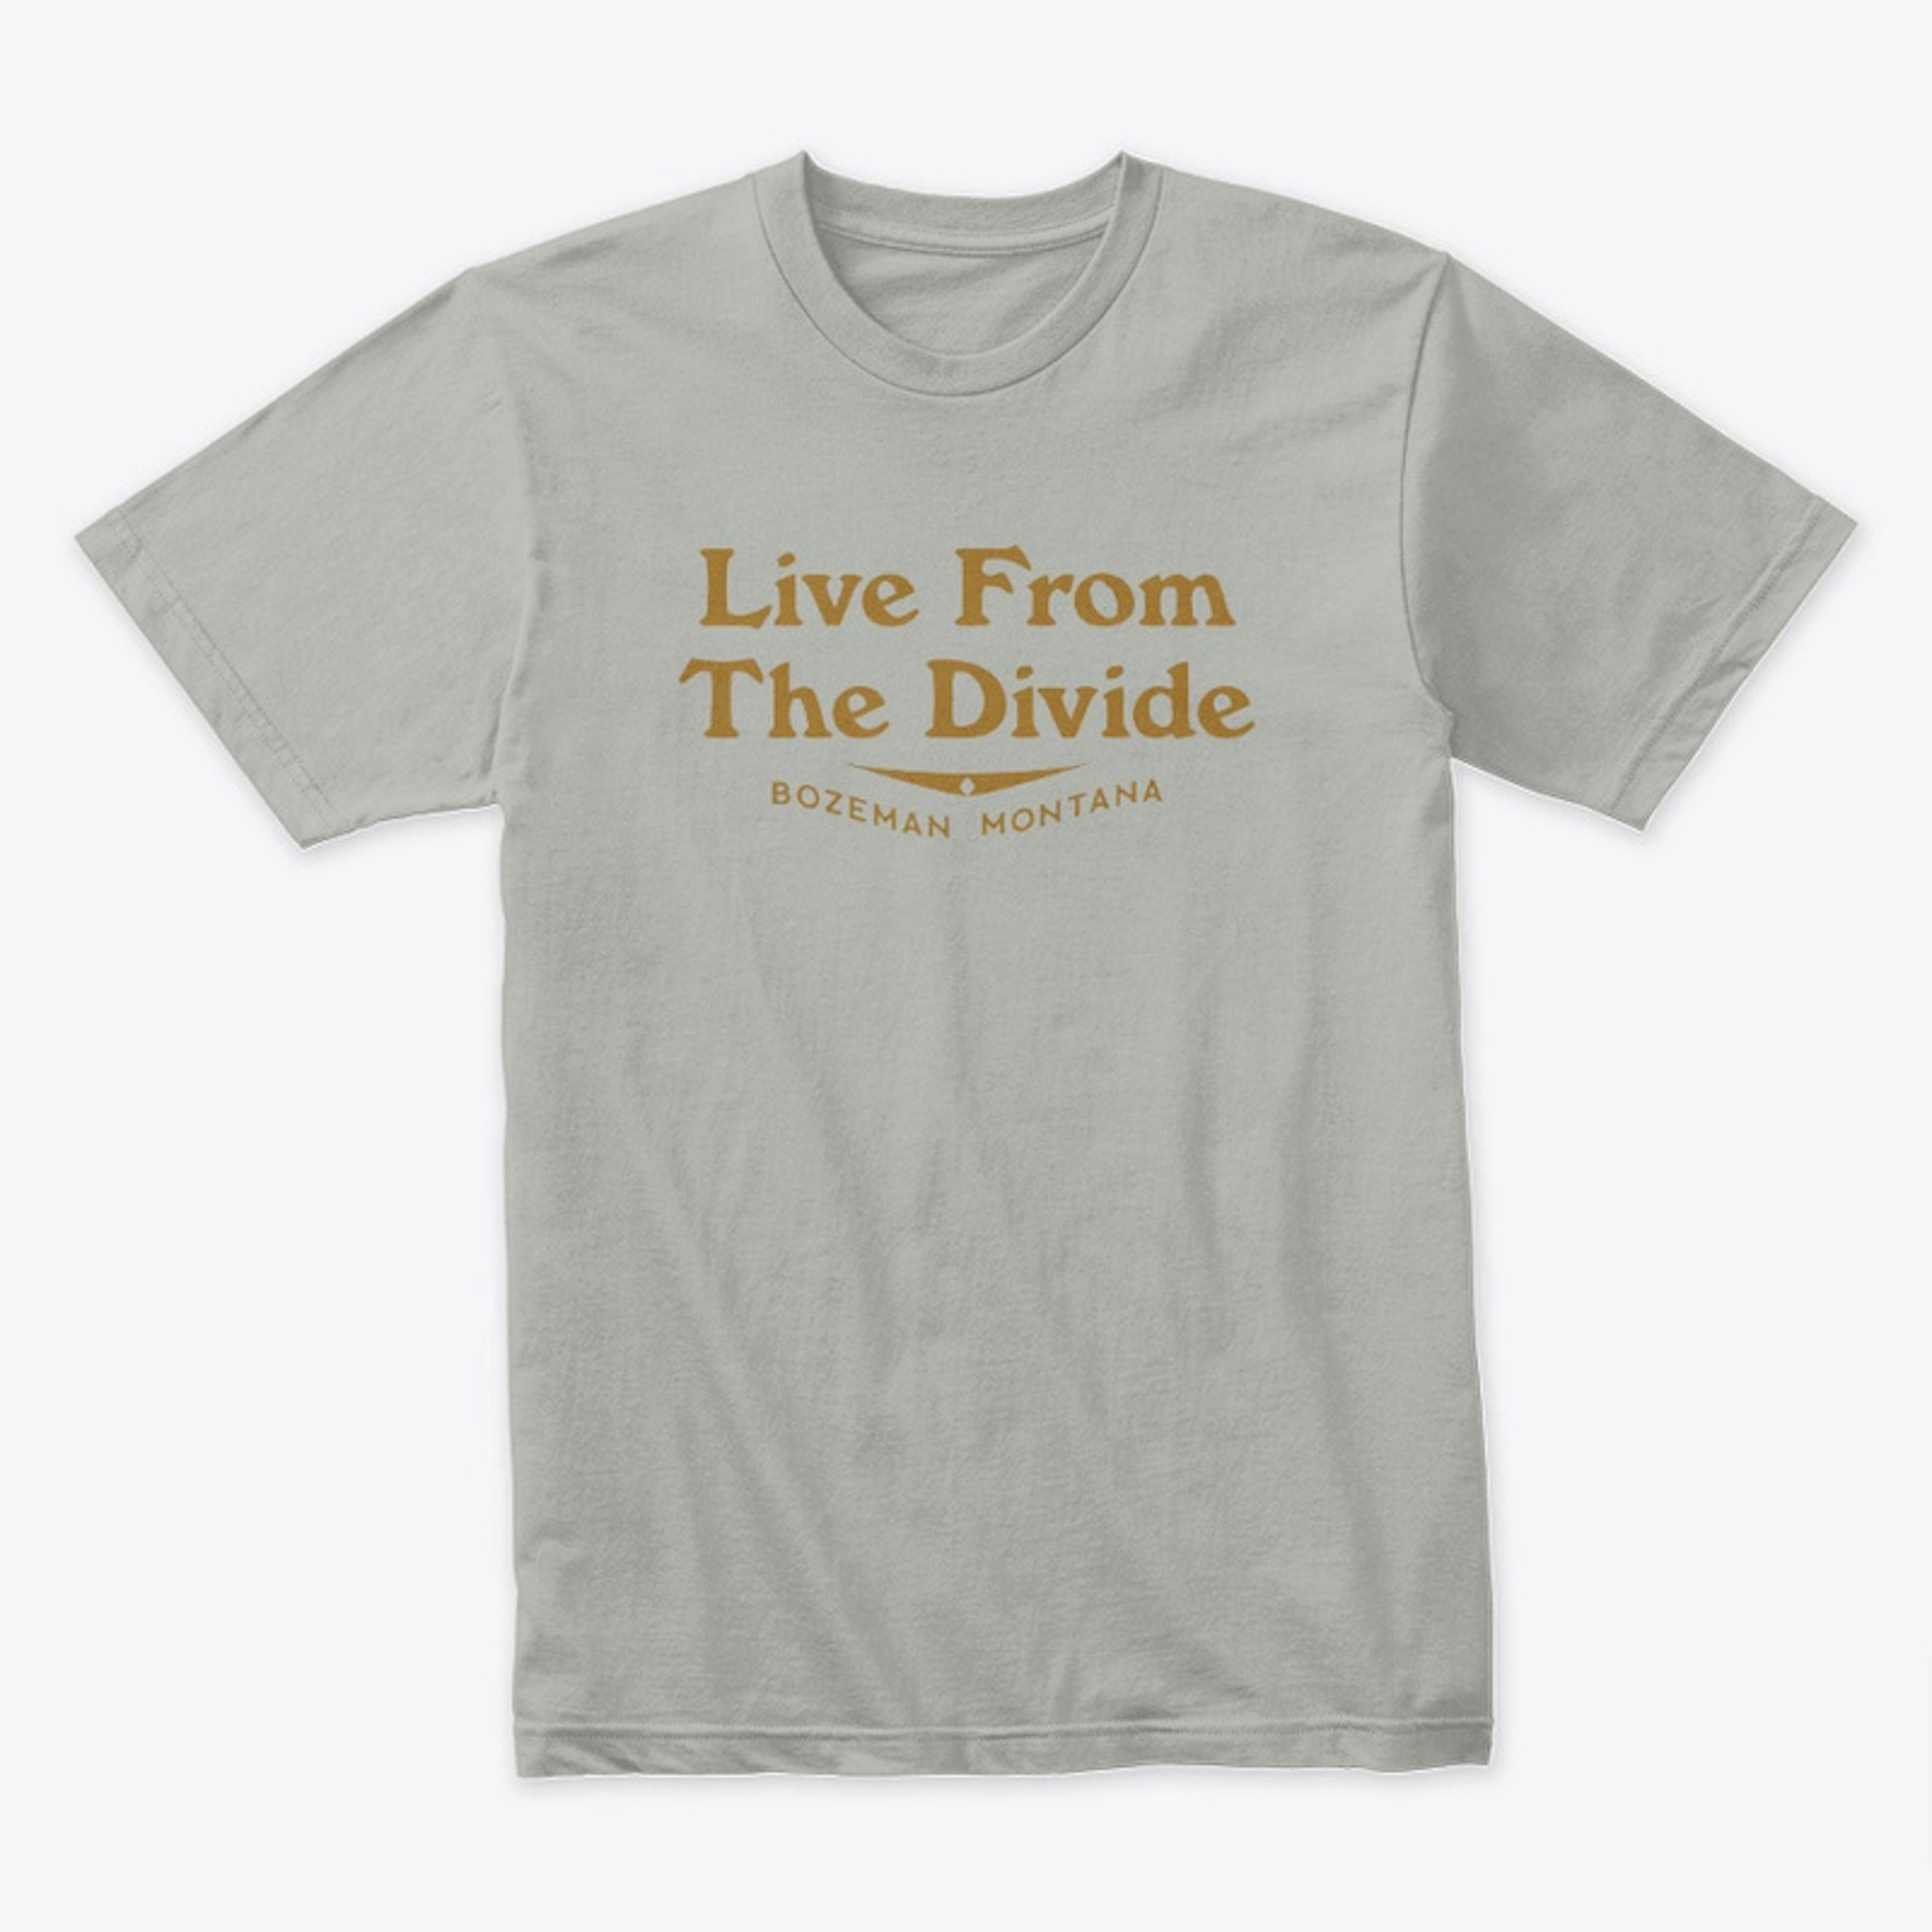 Live From The Divide Tee